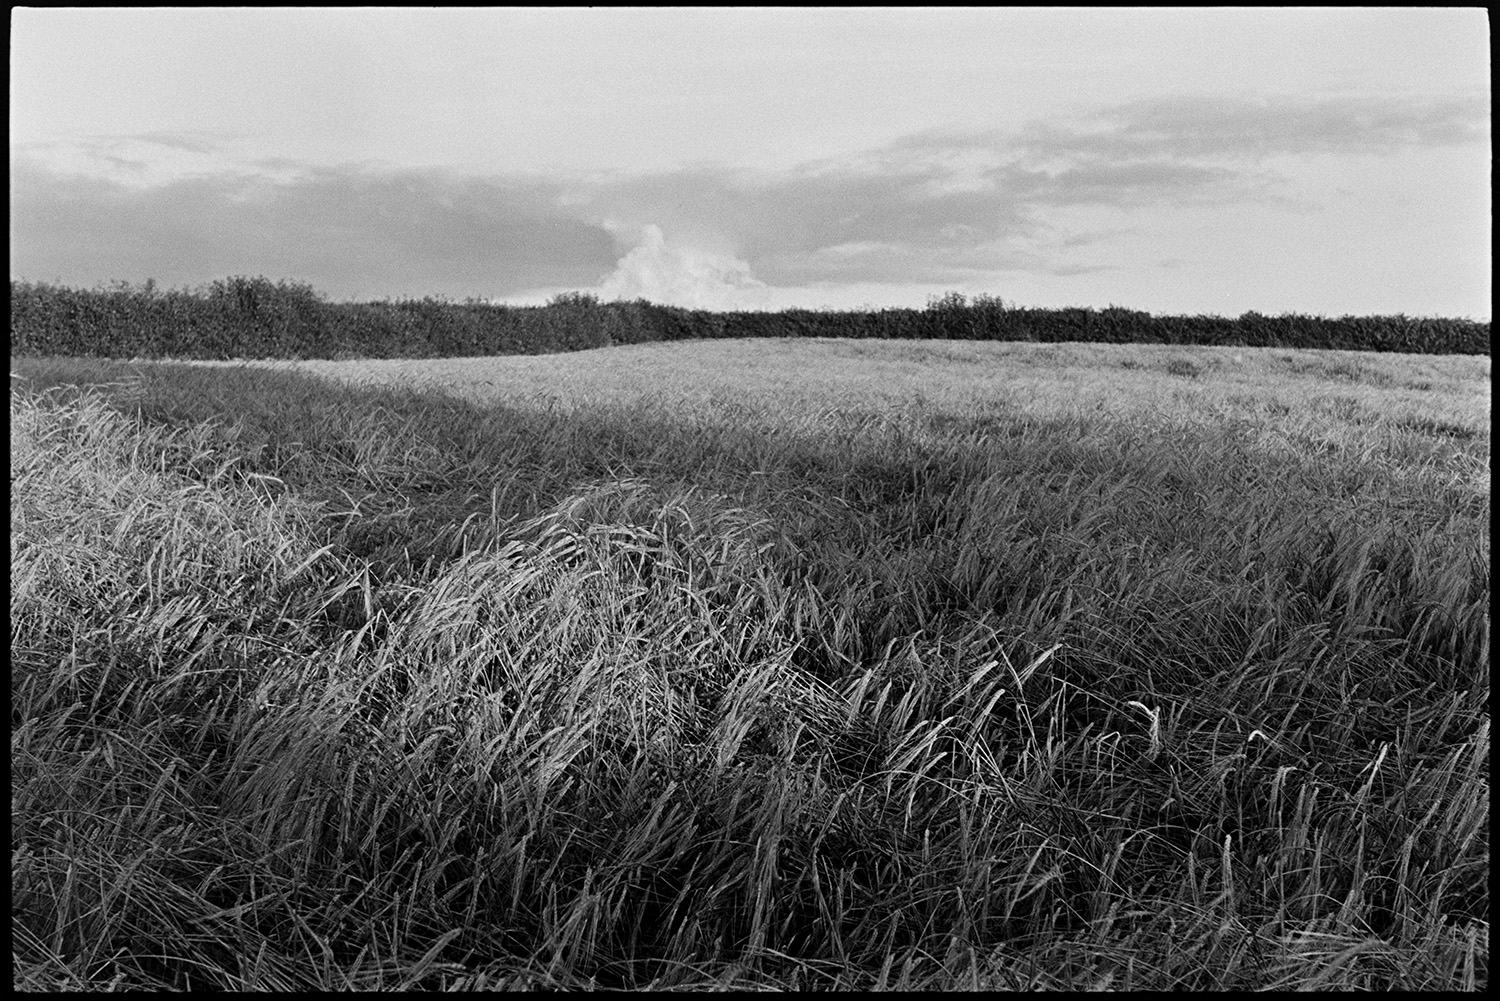 Close up of barley.
[A view of barley growing in a field at Windwhistle, Upcott, near Dolton. A hedge surrounds the field and clouds are in the sky above. Shadows are falling across the crop.]